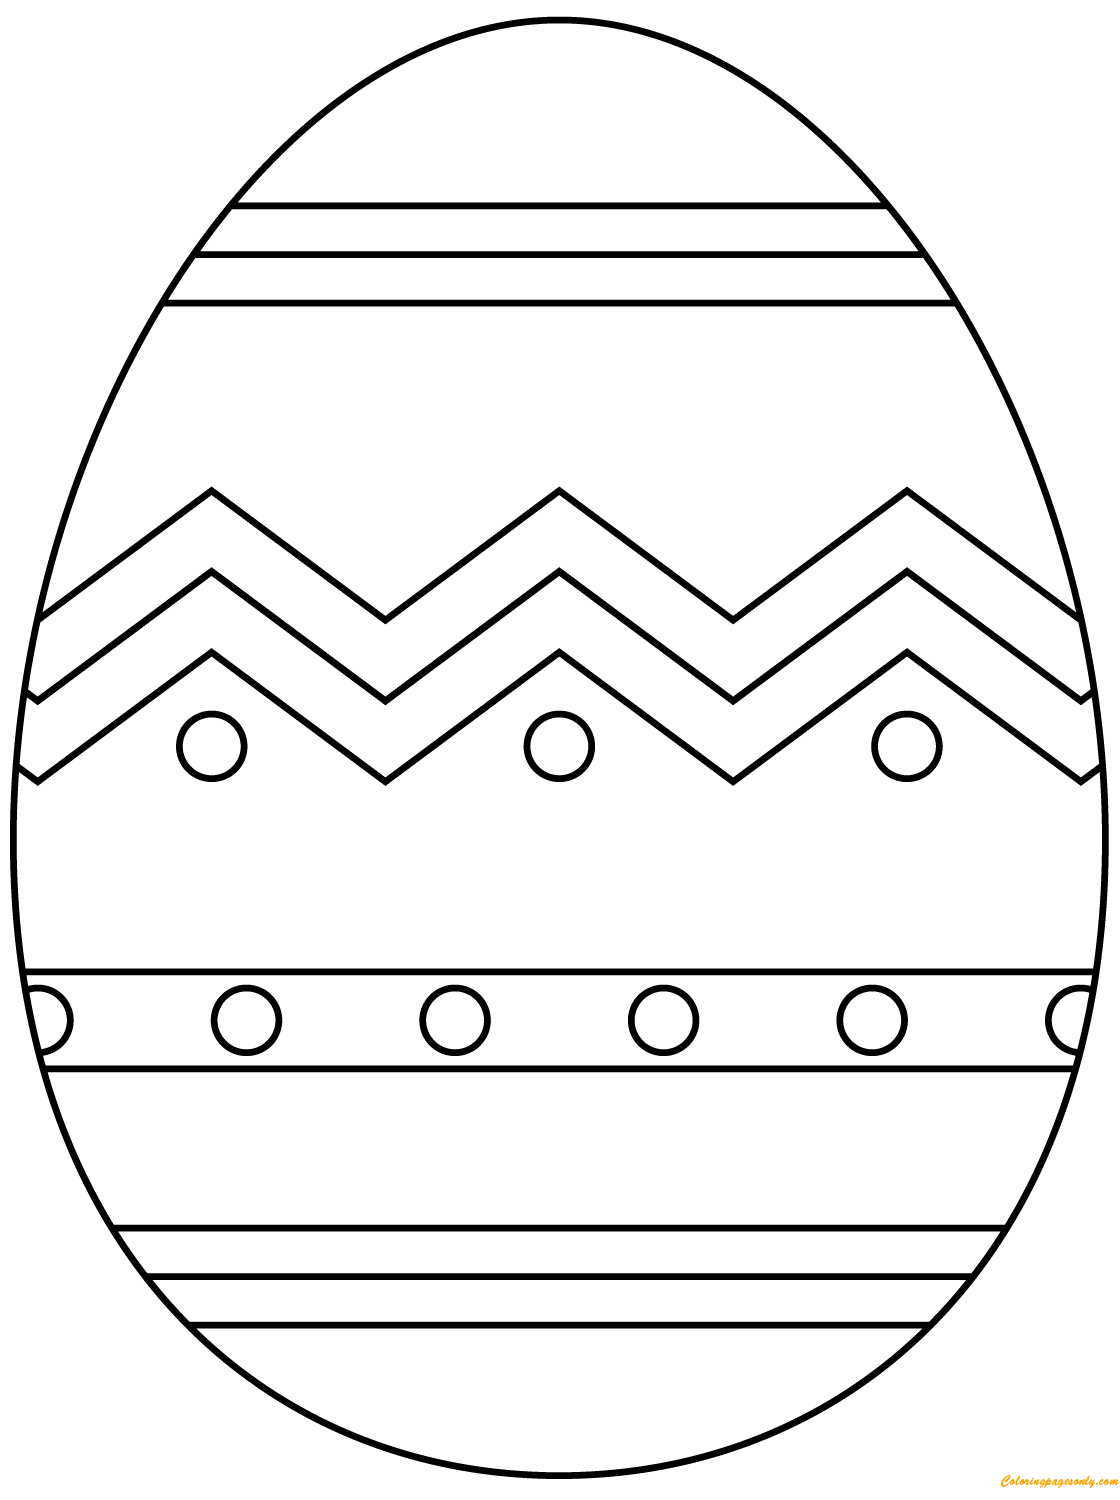 Abstract Pattern Easter Egg Coloring Pages Arts & Culture Coloring